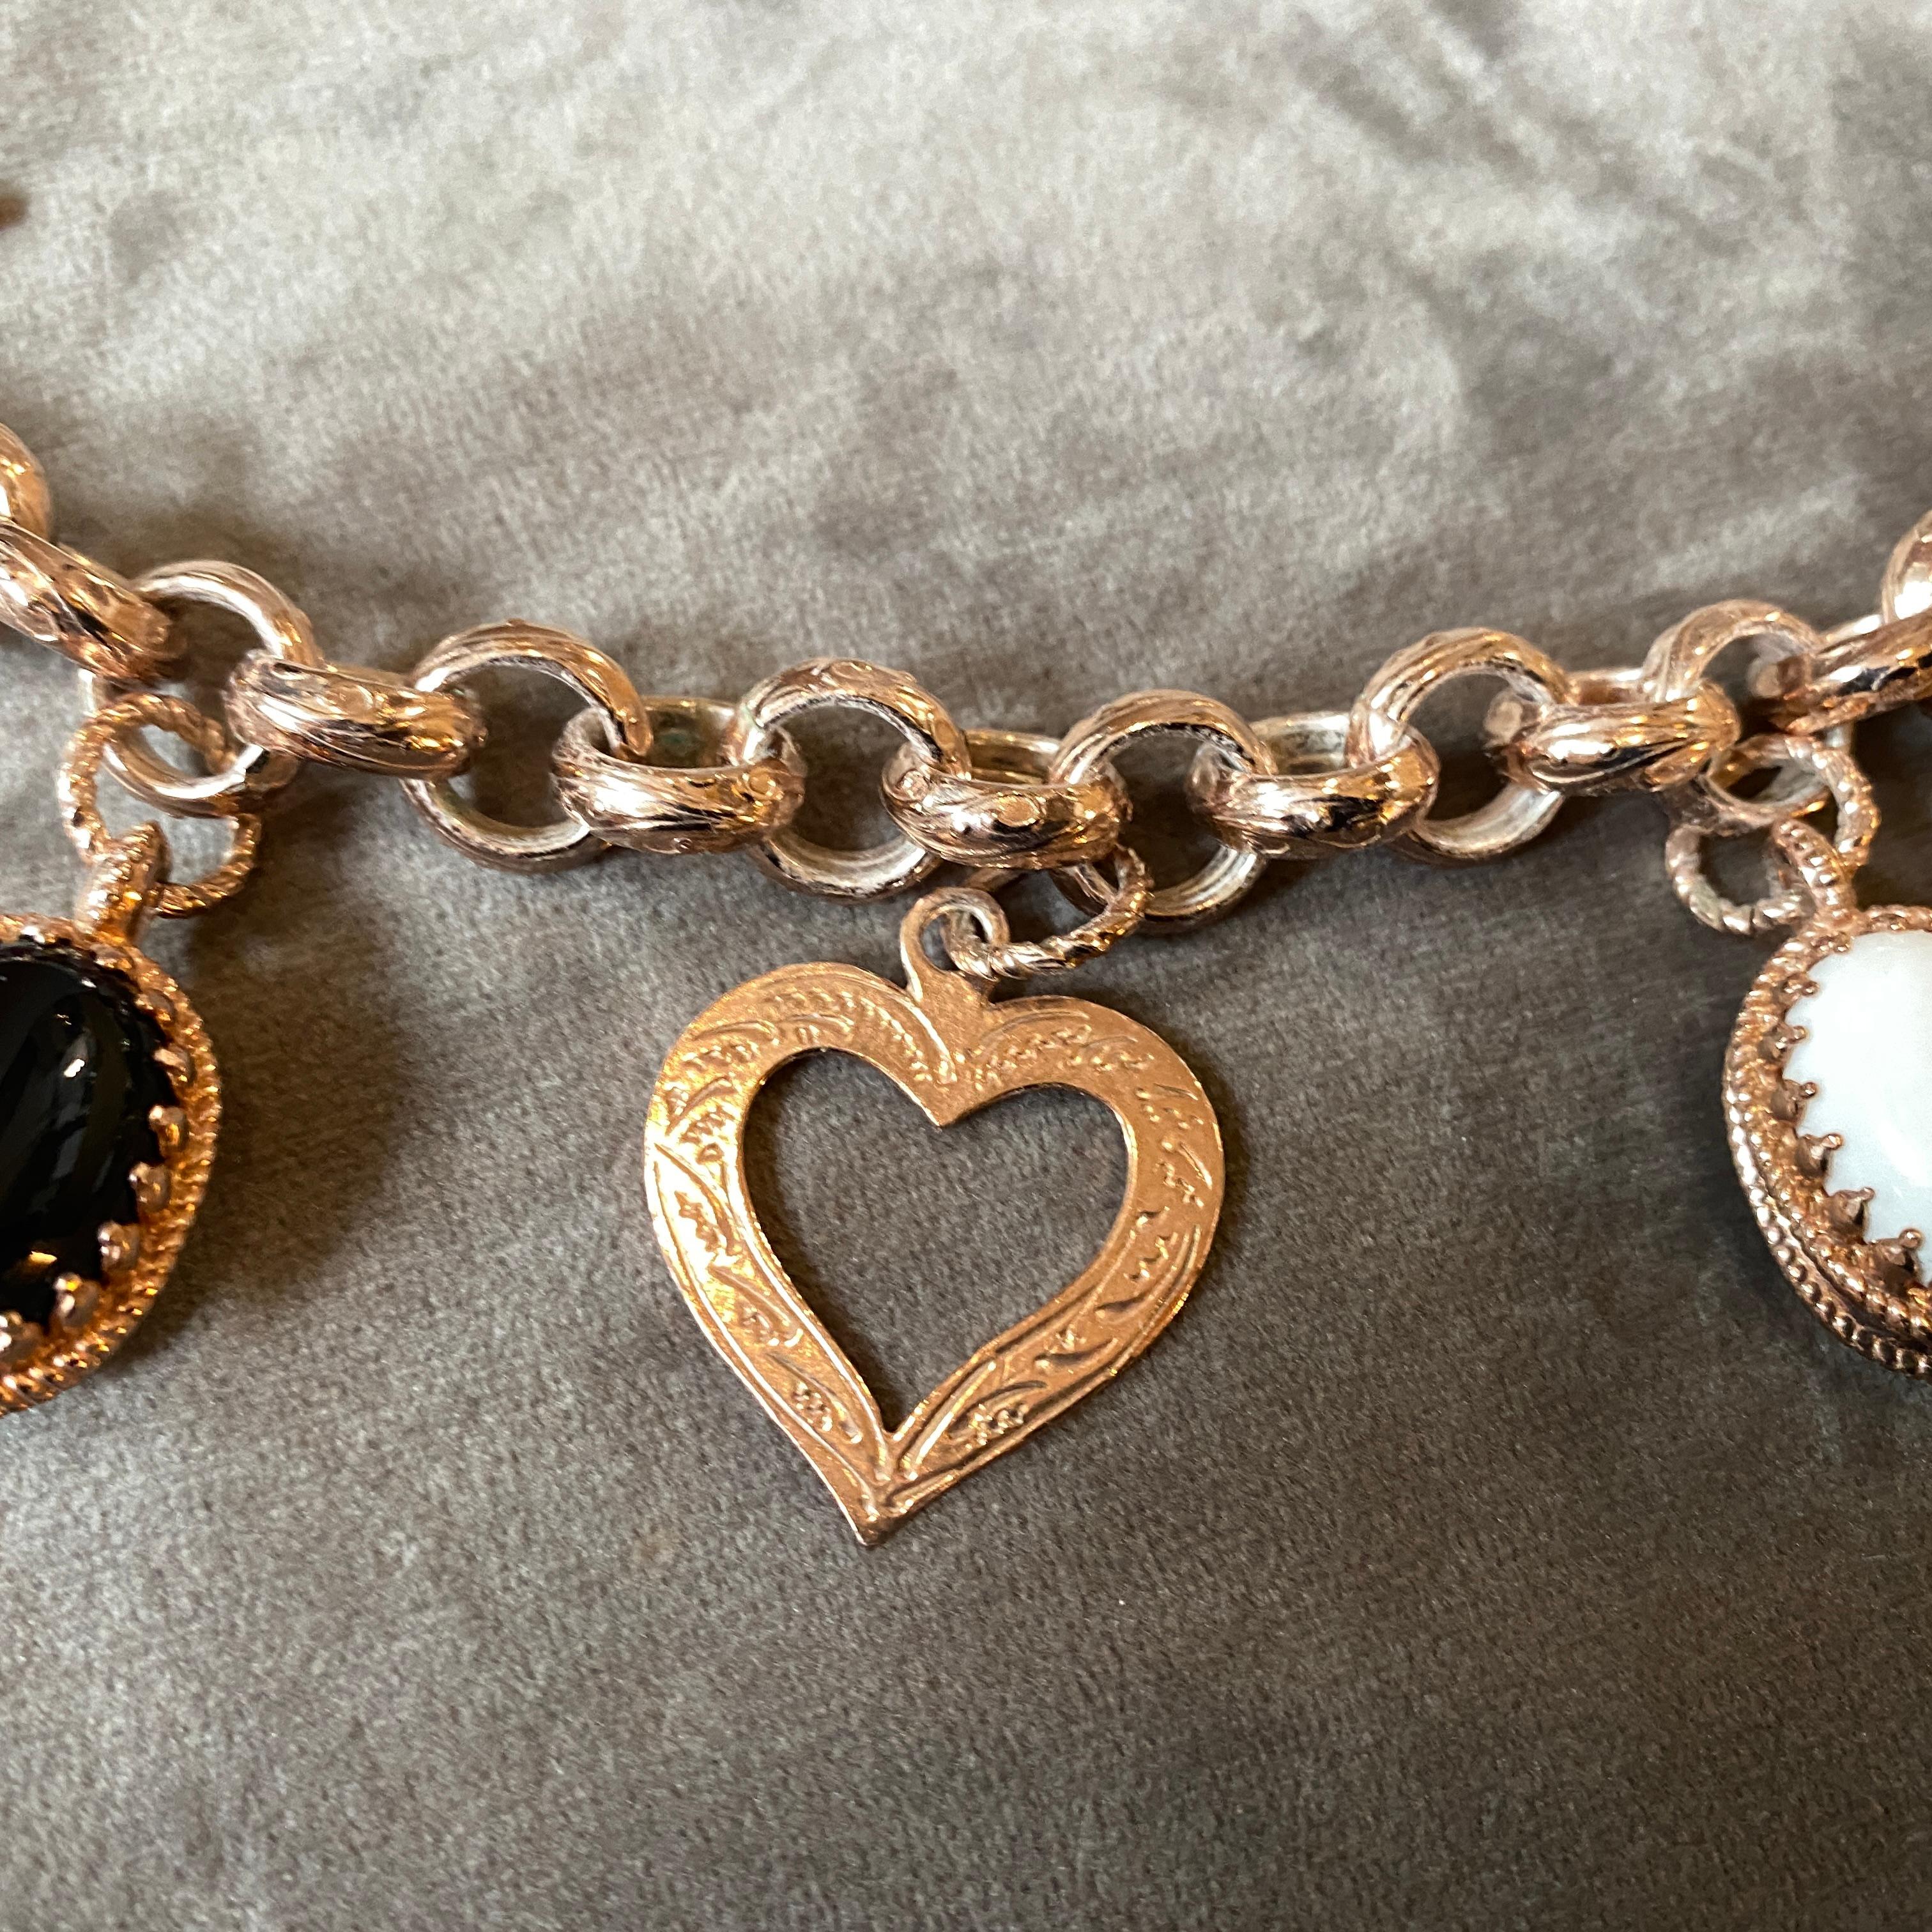 An hand-crafted charm bracelet made in Italy in the Nineties by Anomis, it's in lovely condition, the onyx and white agate cabochon and the gold plated sterling silver gives it a real jewel look. The hearts are mixed with double sides onyx and agate